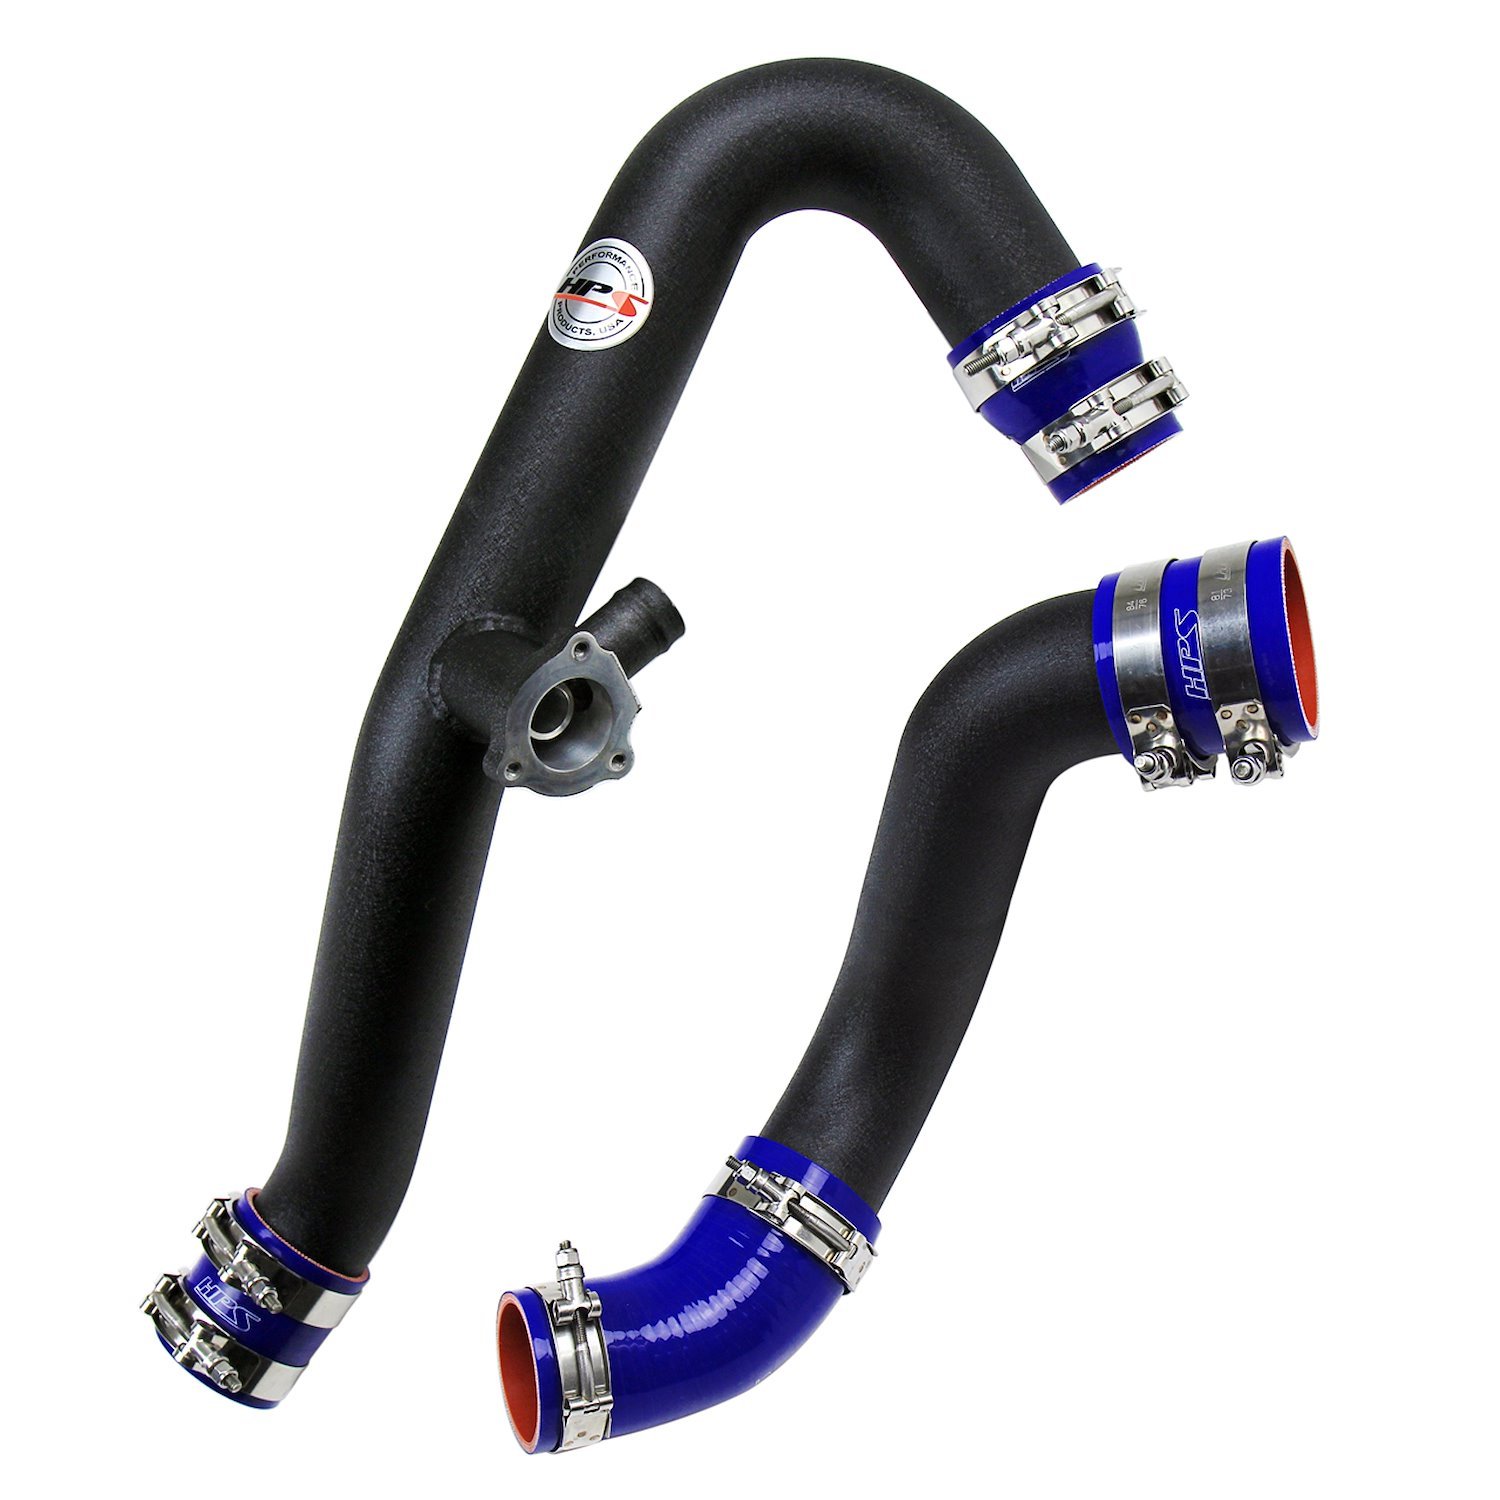 17-102WB Turbo Charge Pipe Kit, Dyno Proven +17.1 HP, +16.9 TQ, Reduce Turbo Lag, 2.75 in. Pipe